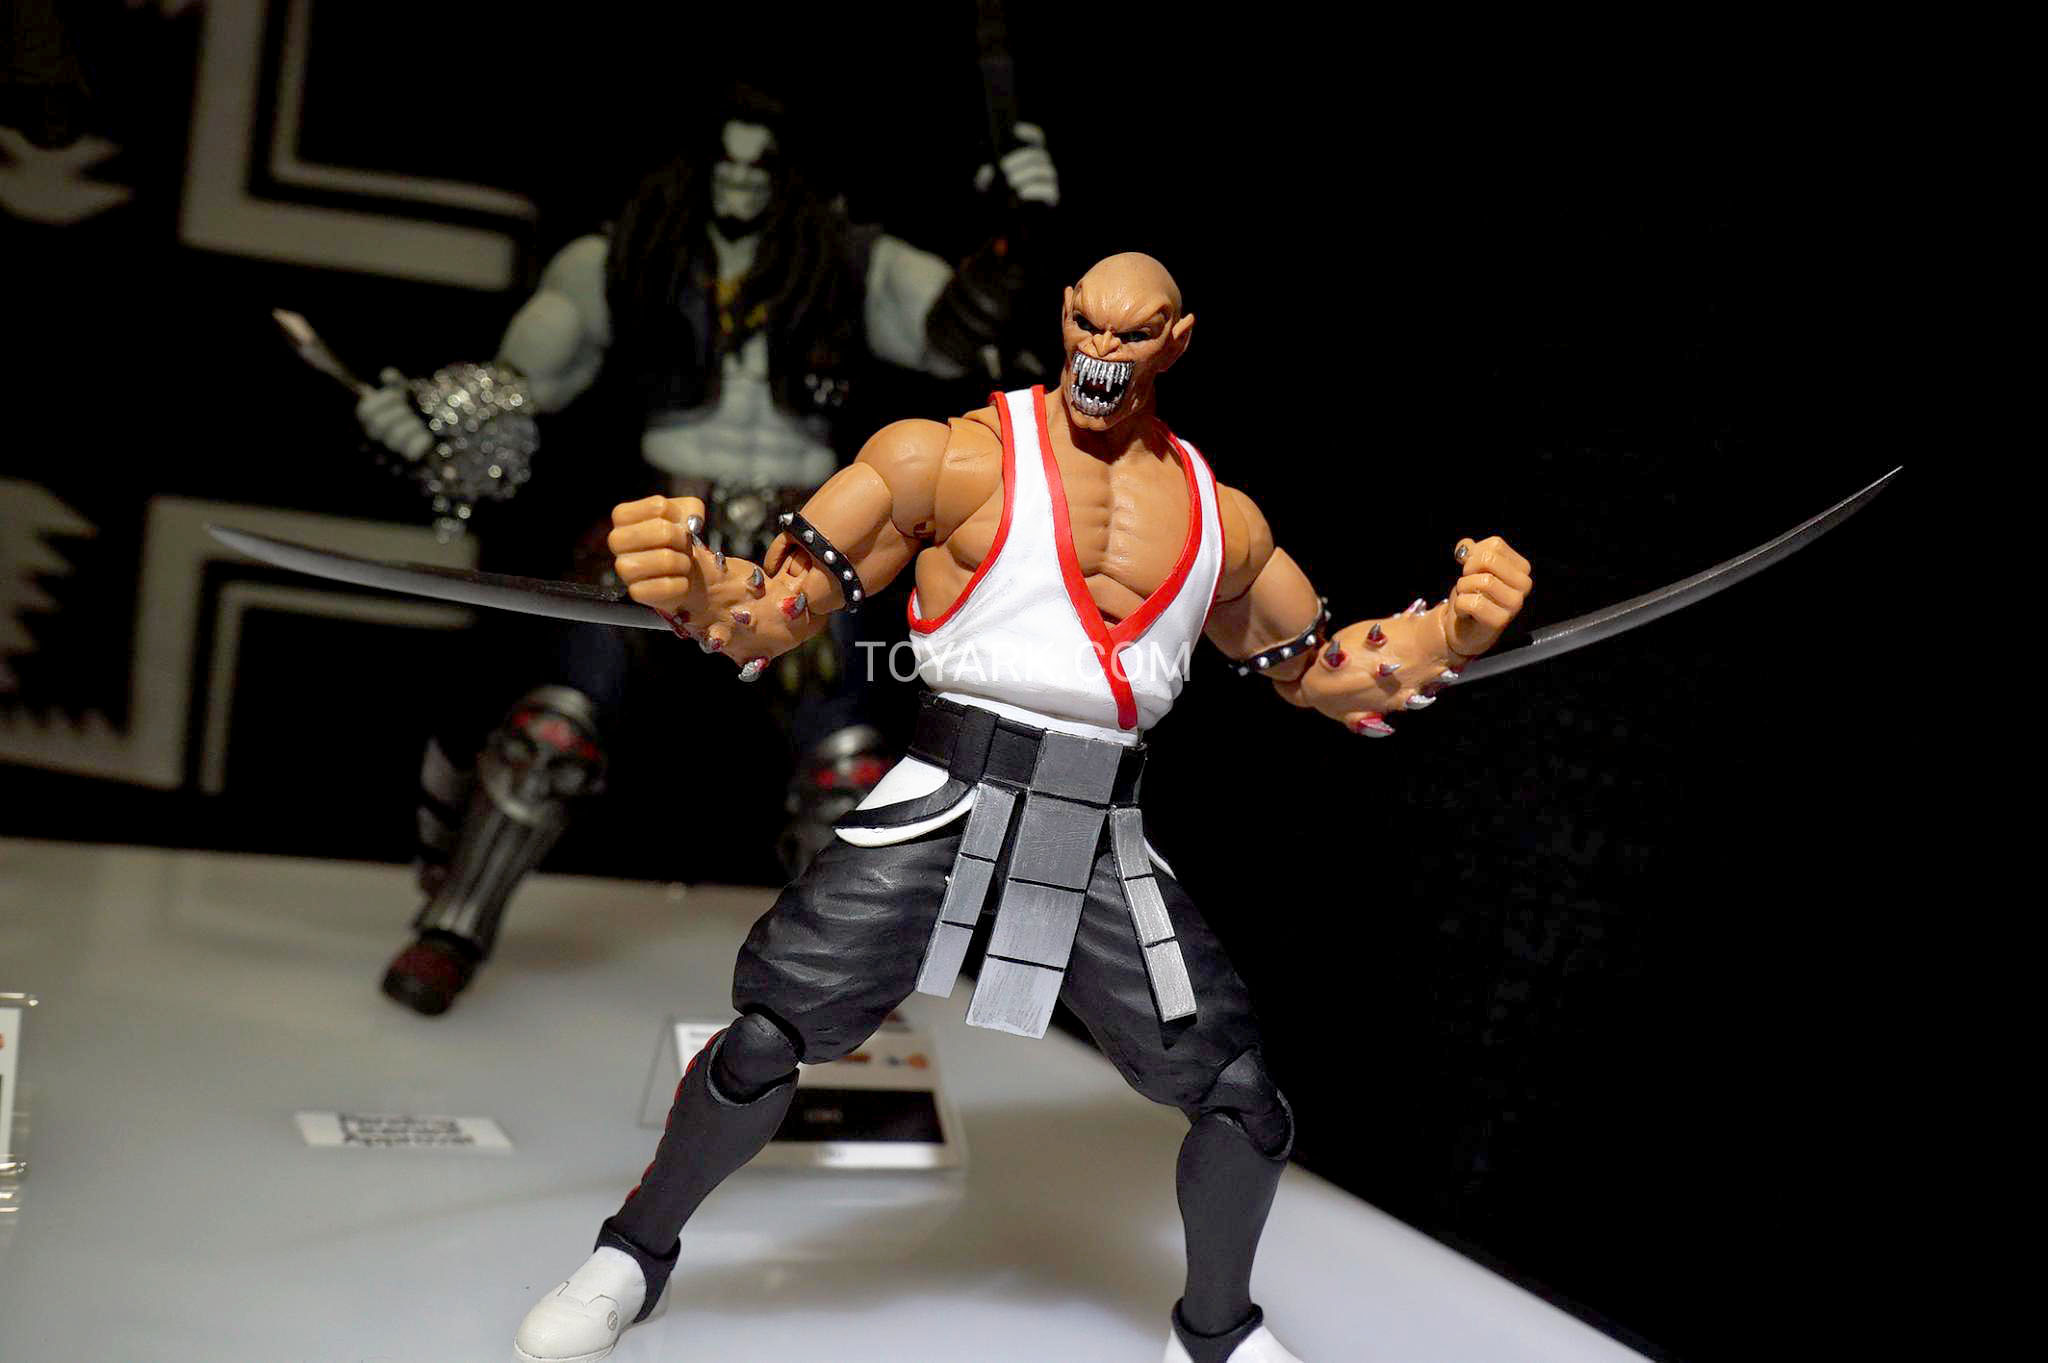 Storm MK Shao Kahn - Toyark Gallery - Toy Discussion at